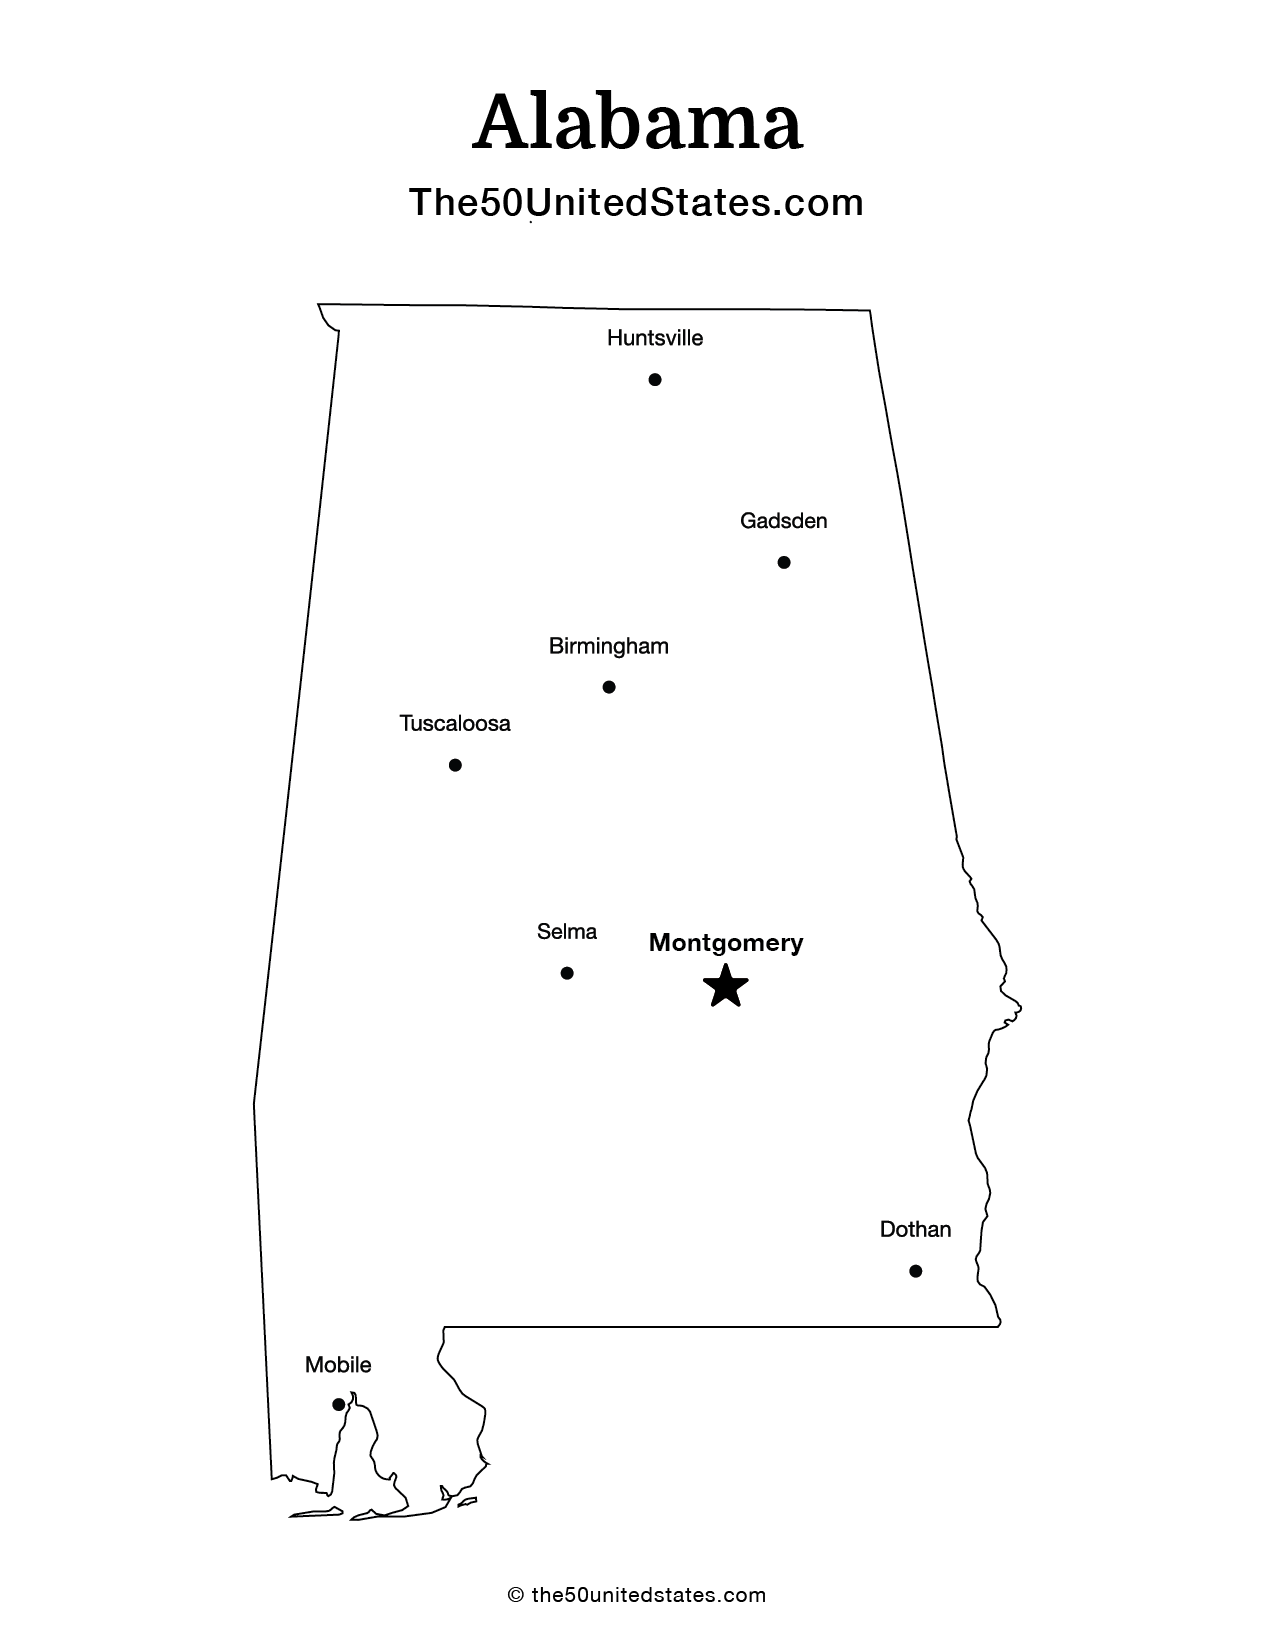 Map of Alabama with Cities (Labeled)